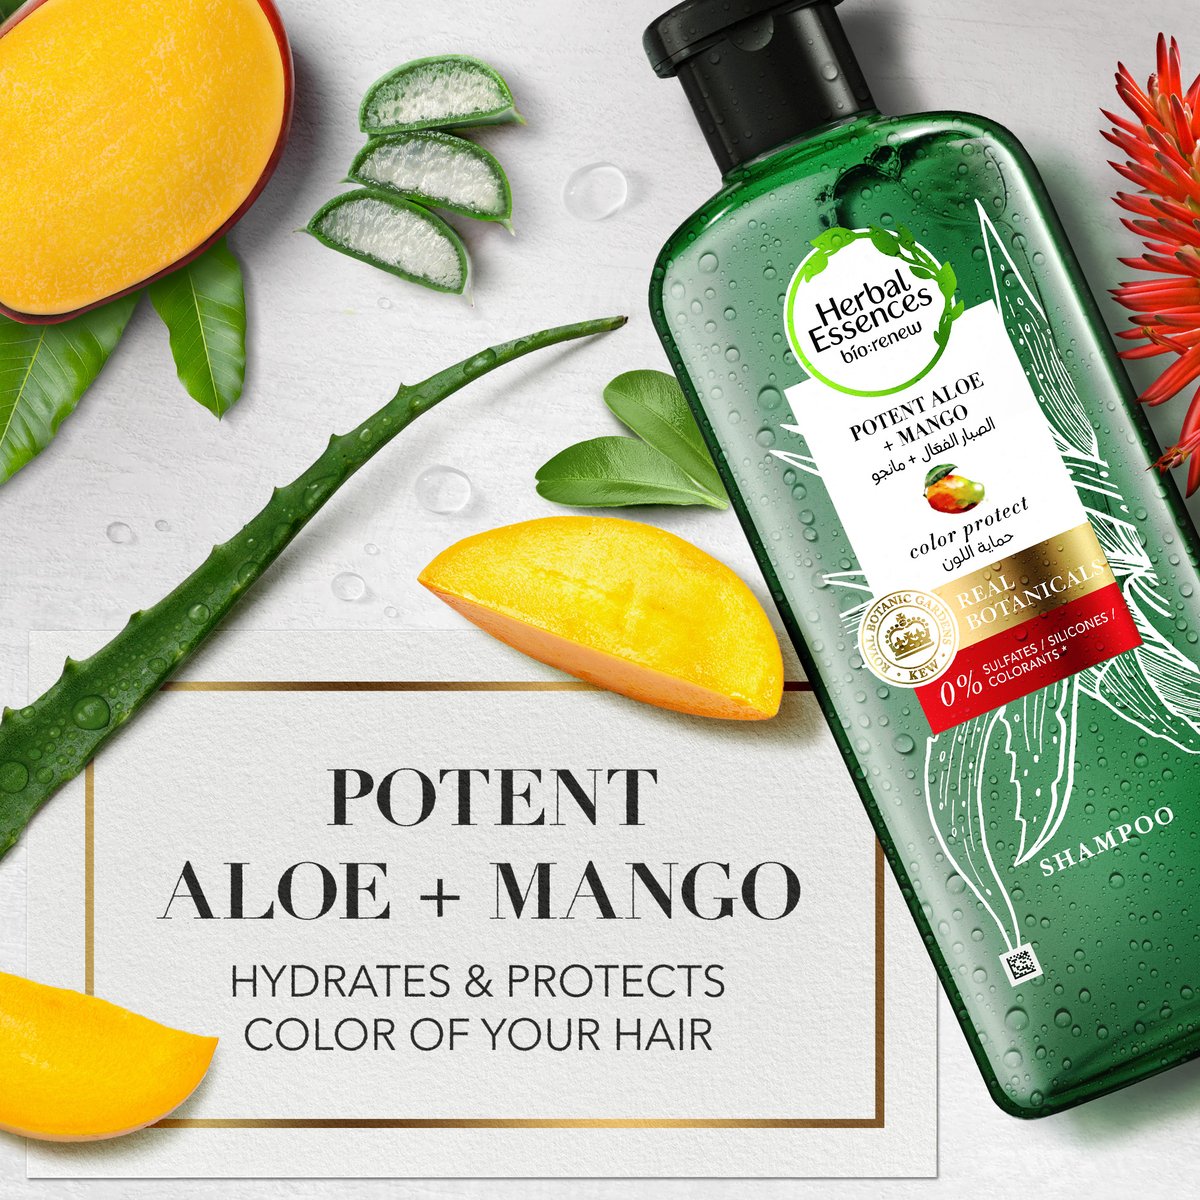 Herbal Essences Sulfate Free Potent Aloe + Mango Shampoo 400 ml & Conditioner for Dry Hair and Frizzy Hair 400 ml